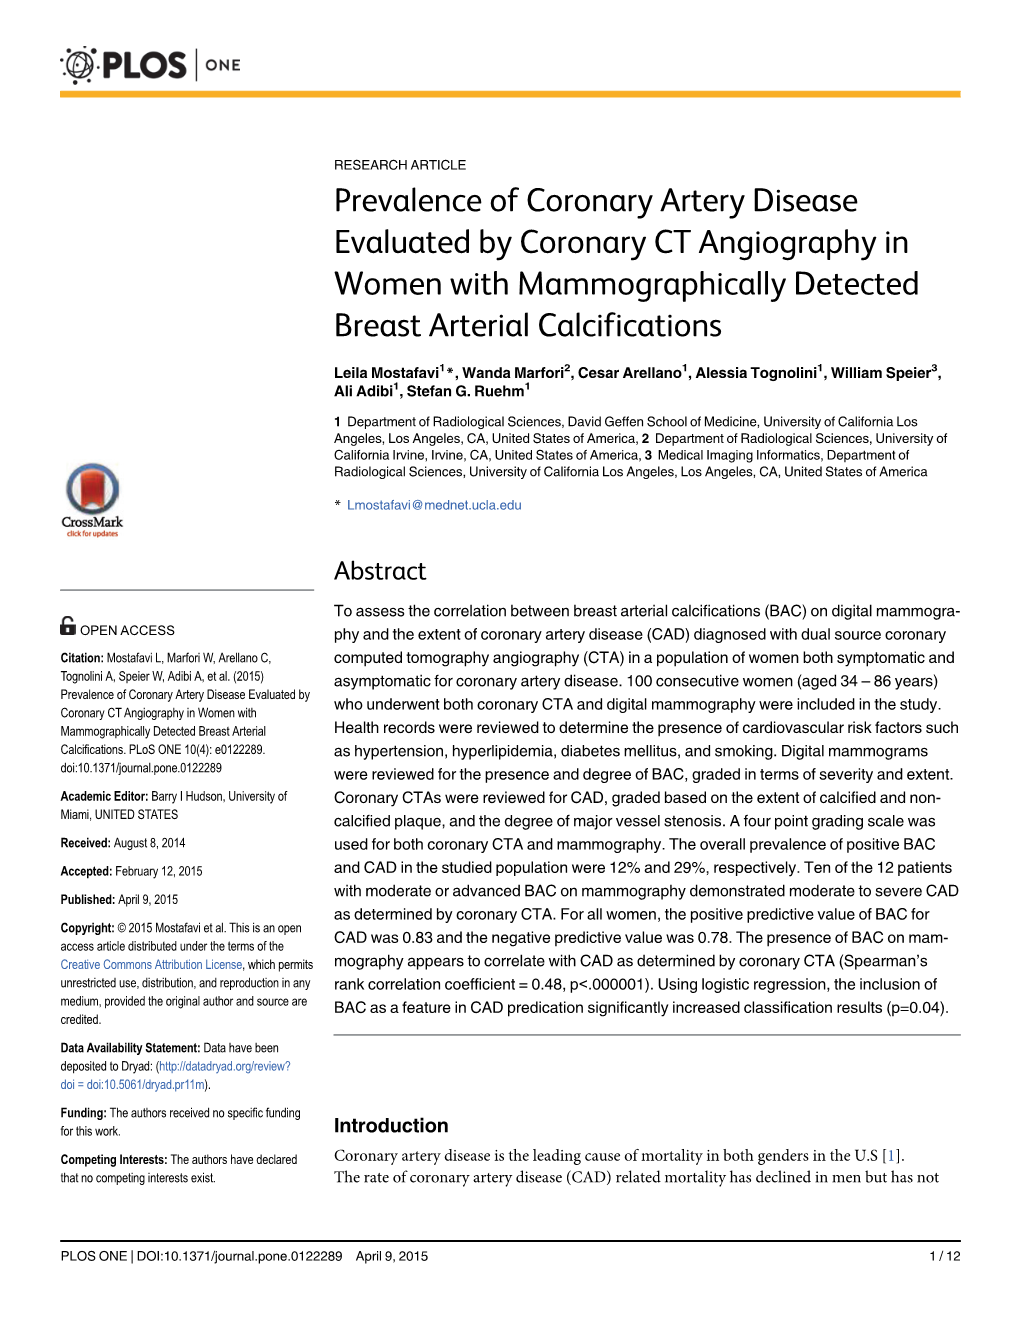 Prevalence of Coronary Artery Disease Evaluated by Coronary CT Angiography in Women with Mammographically Detected Breast Arterial Calcifications